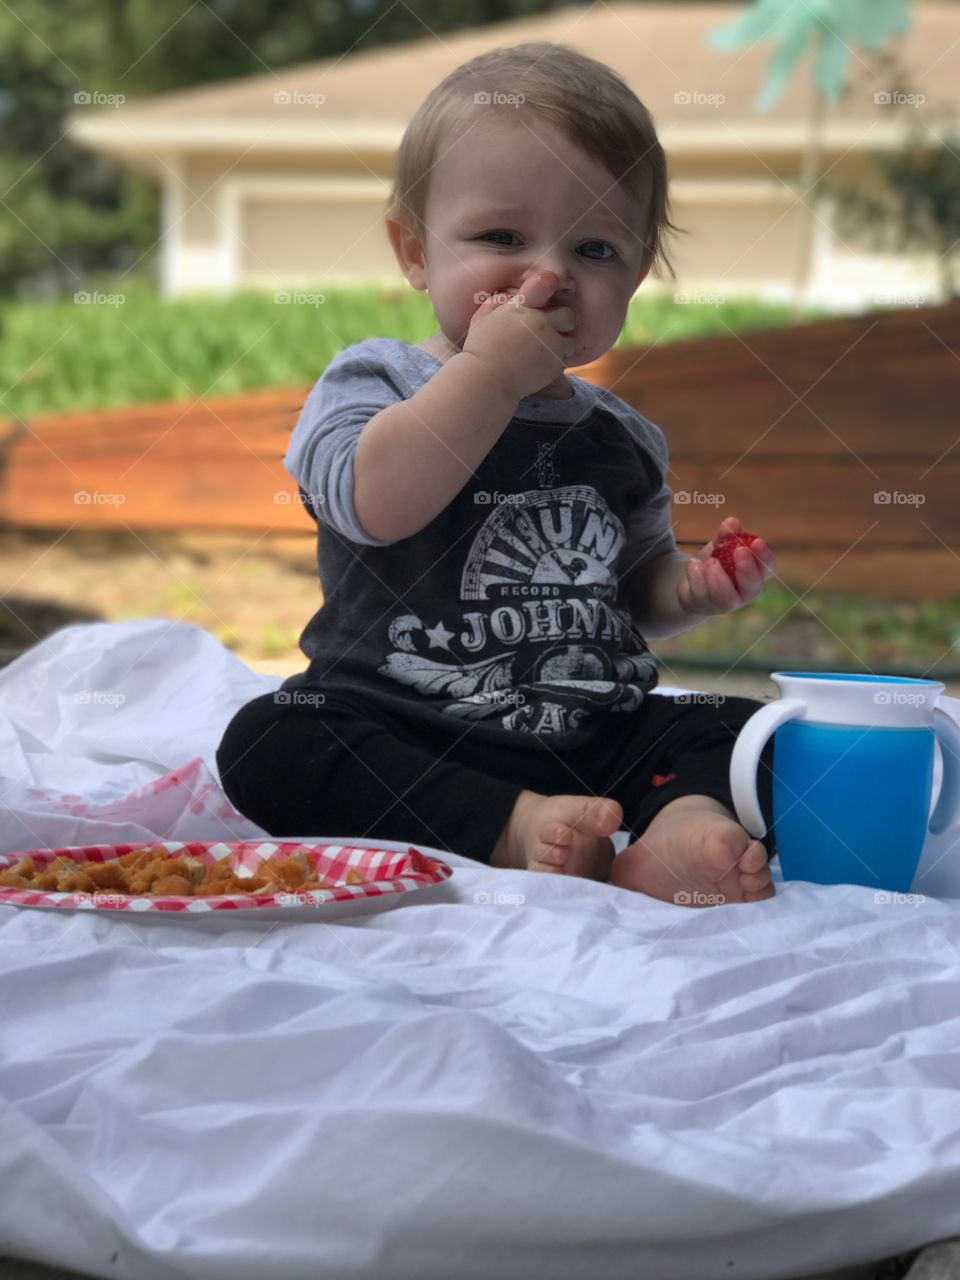 Picnic in the driveway